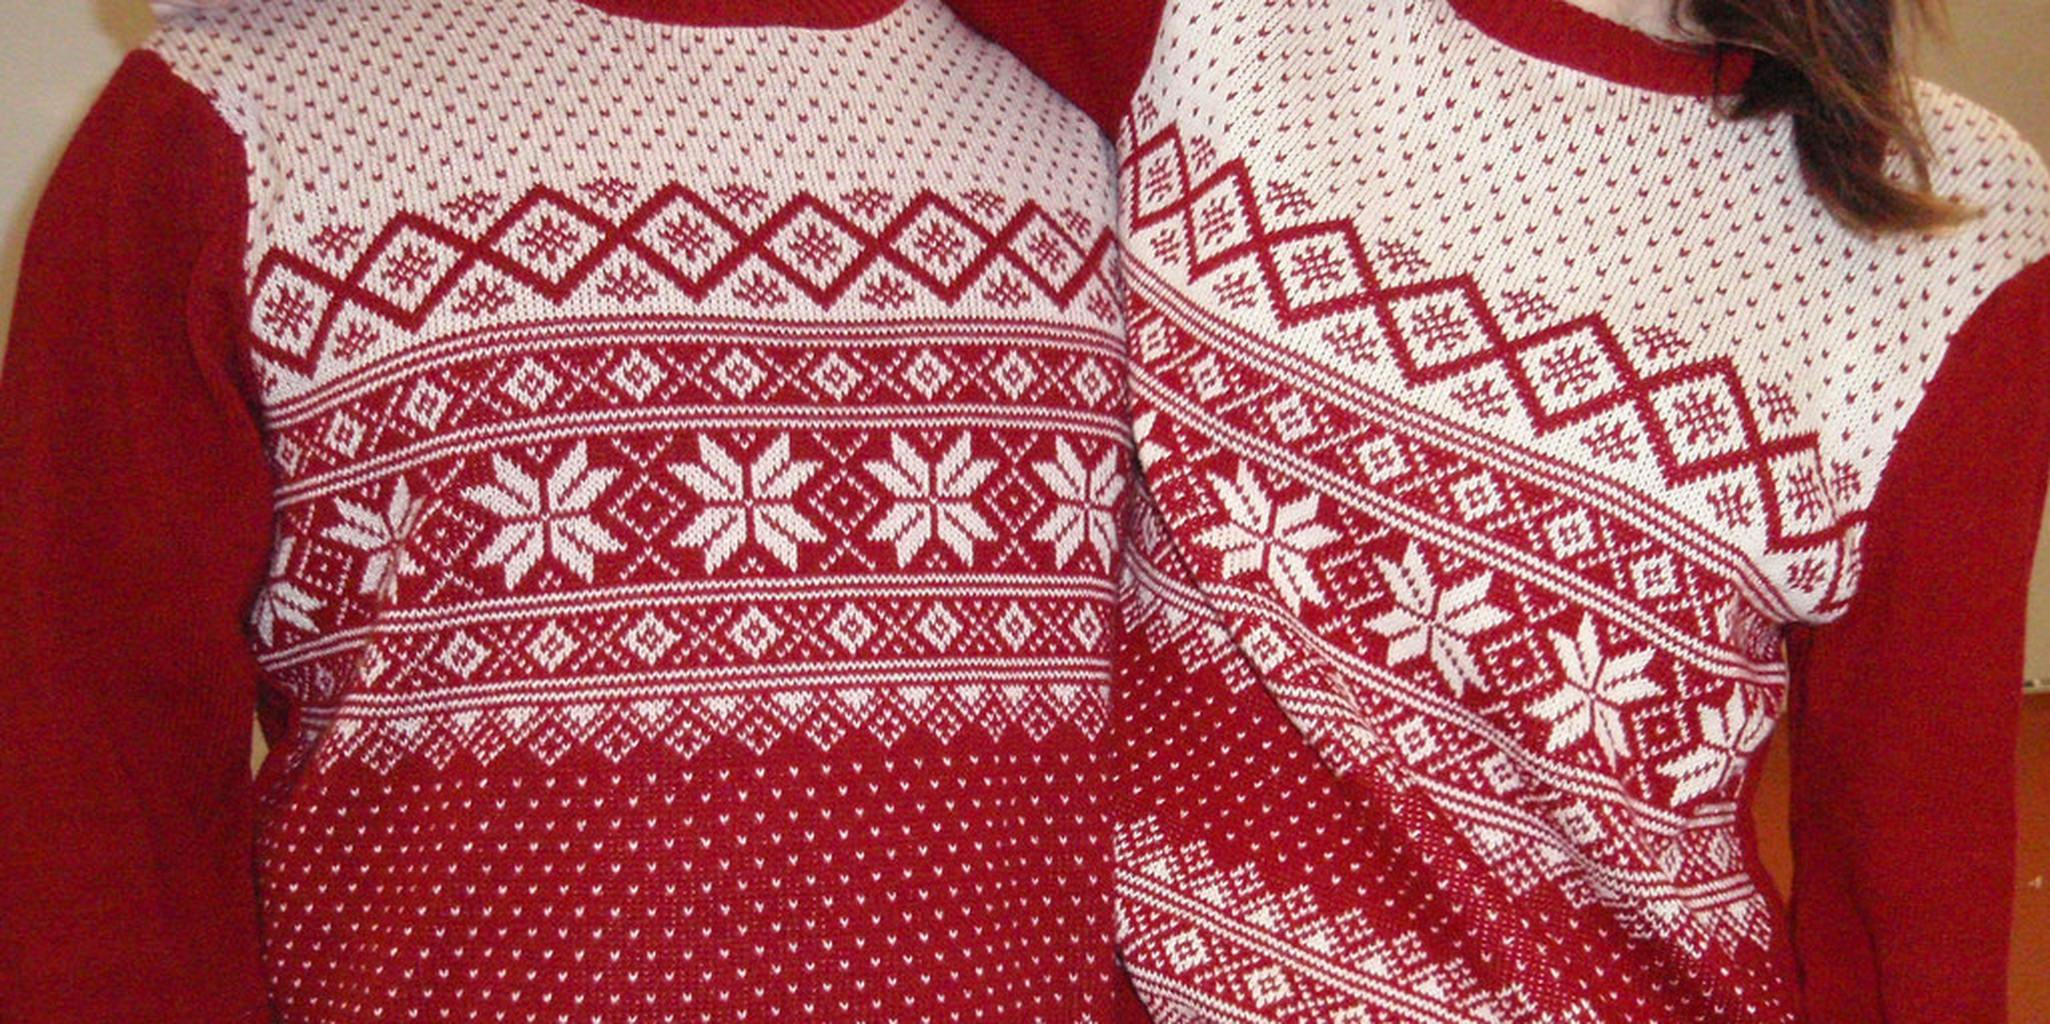 Christmas will be extra nippy with this NSFW sweater